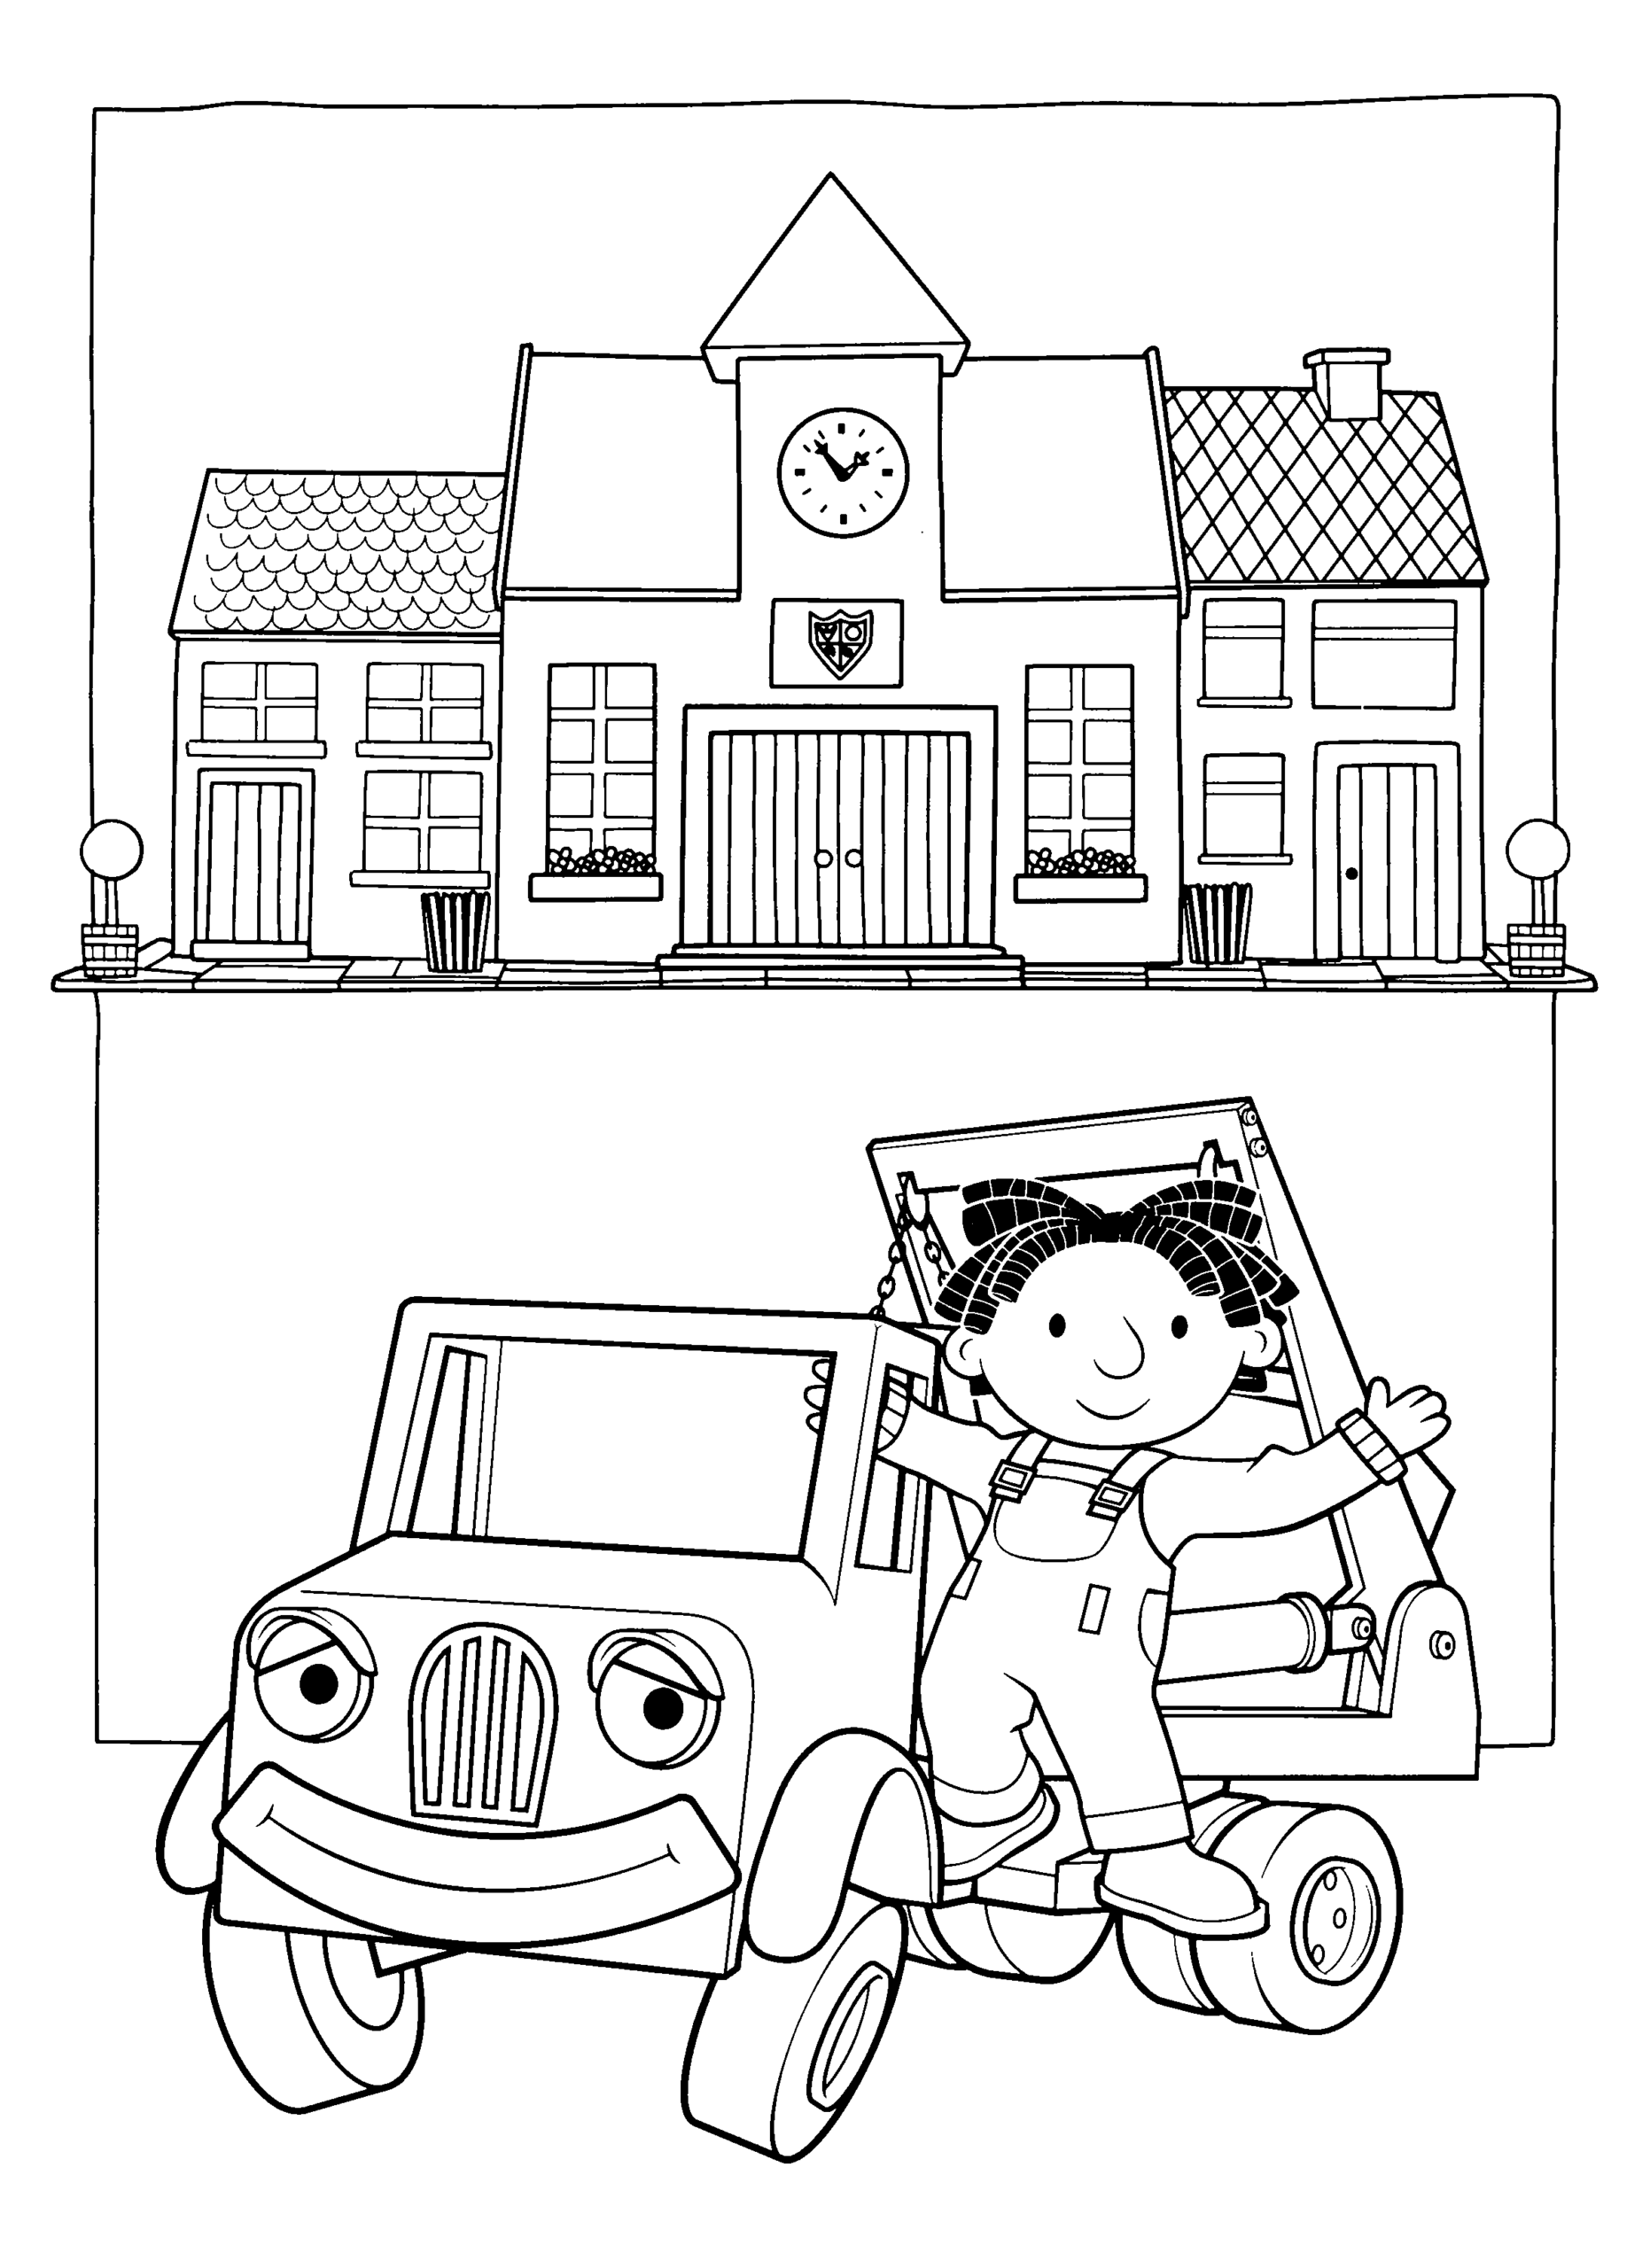 Bob the Builder Coloring Pages TV Film bob the builder 3 Printable 2020 01048 Coloring4free